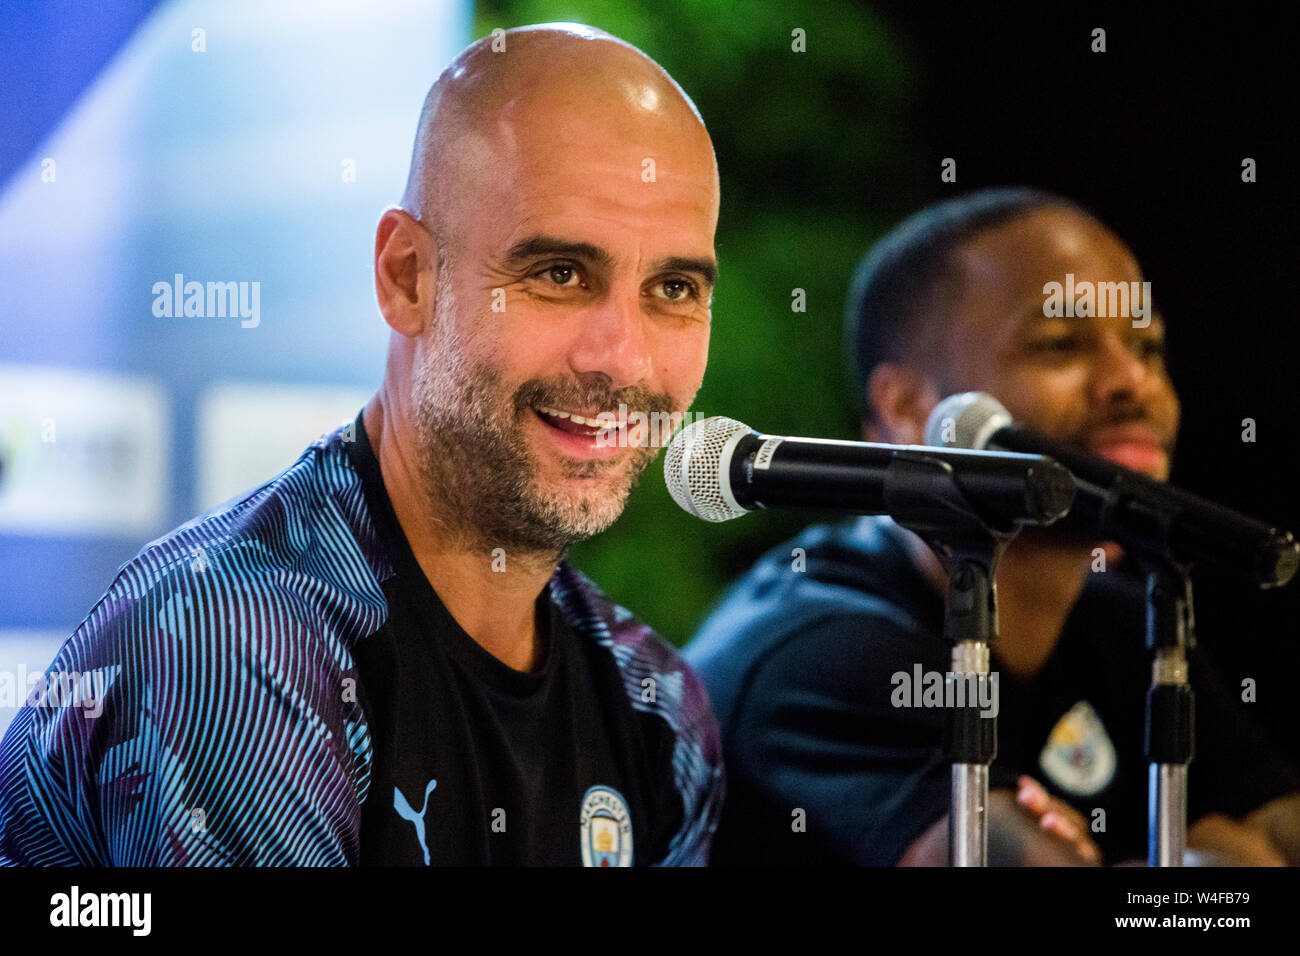 Hong Kong, China. 23rd July, 2019. Premier League club Manchester CityÕs star player Raheem Sterling and Manager Pep Guardiola (pictured) meet the Chinese media at the Grand Hyatt Wan Chai. Credit: Hong Kong Photo News Alamy Live News Stock Photo